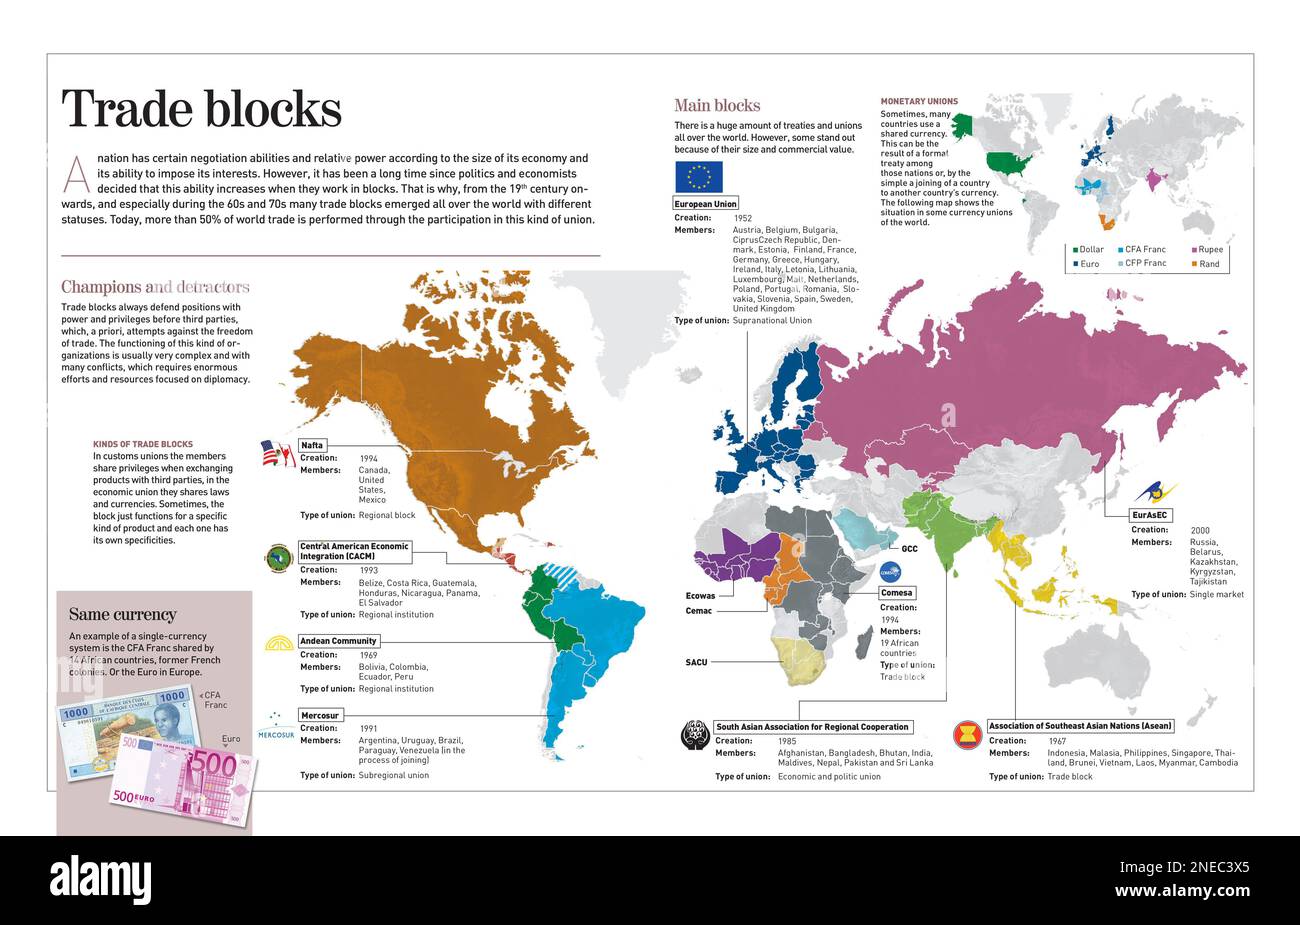 Infographic about the trade blocks that came about in the 14th century as a way to make countries stronger in trade. [Adobe InDesign (.indd); 4960x8503]. Stock Photo